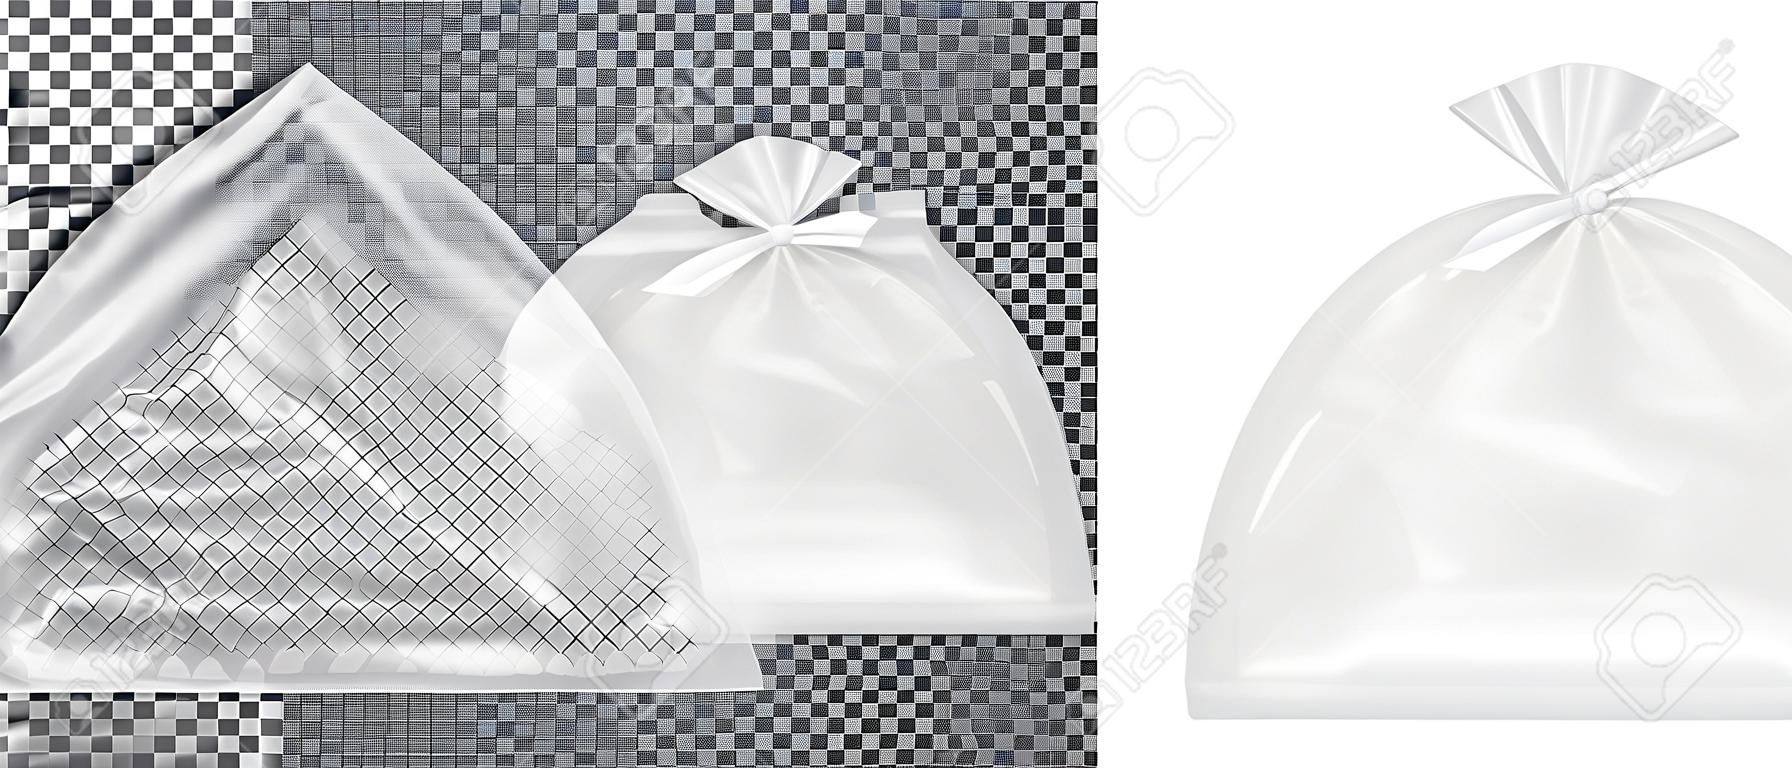 Transparent plastic bag. Packaging for bread, coffee, sweets, cookies and gift.